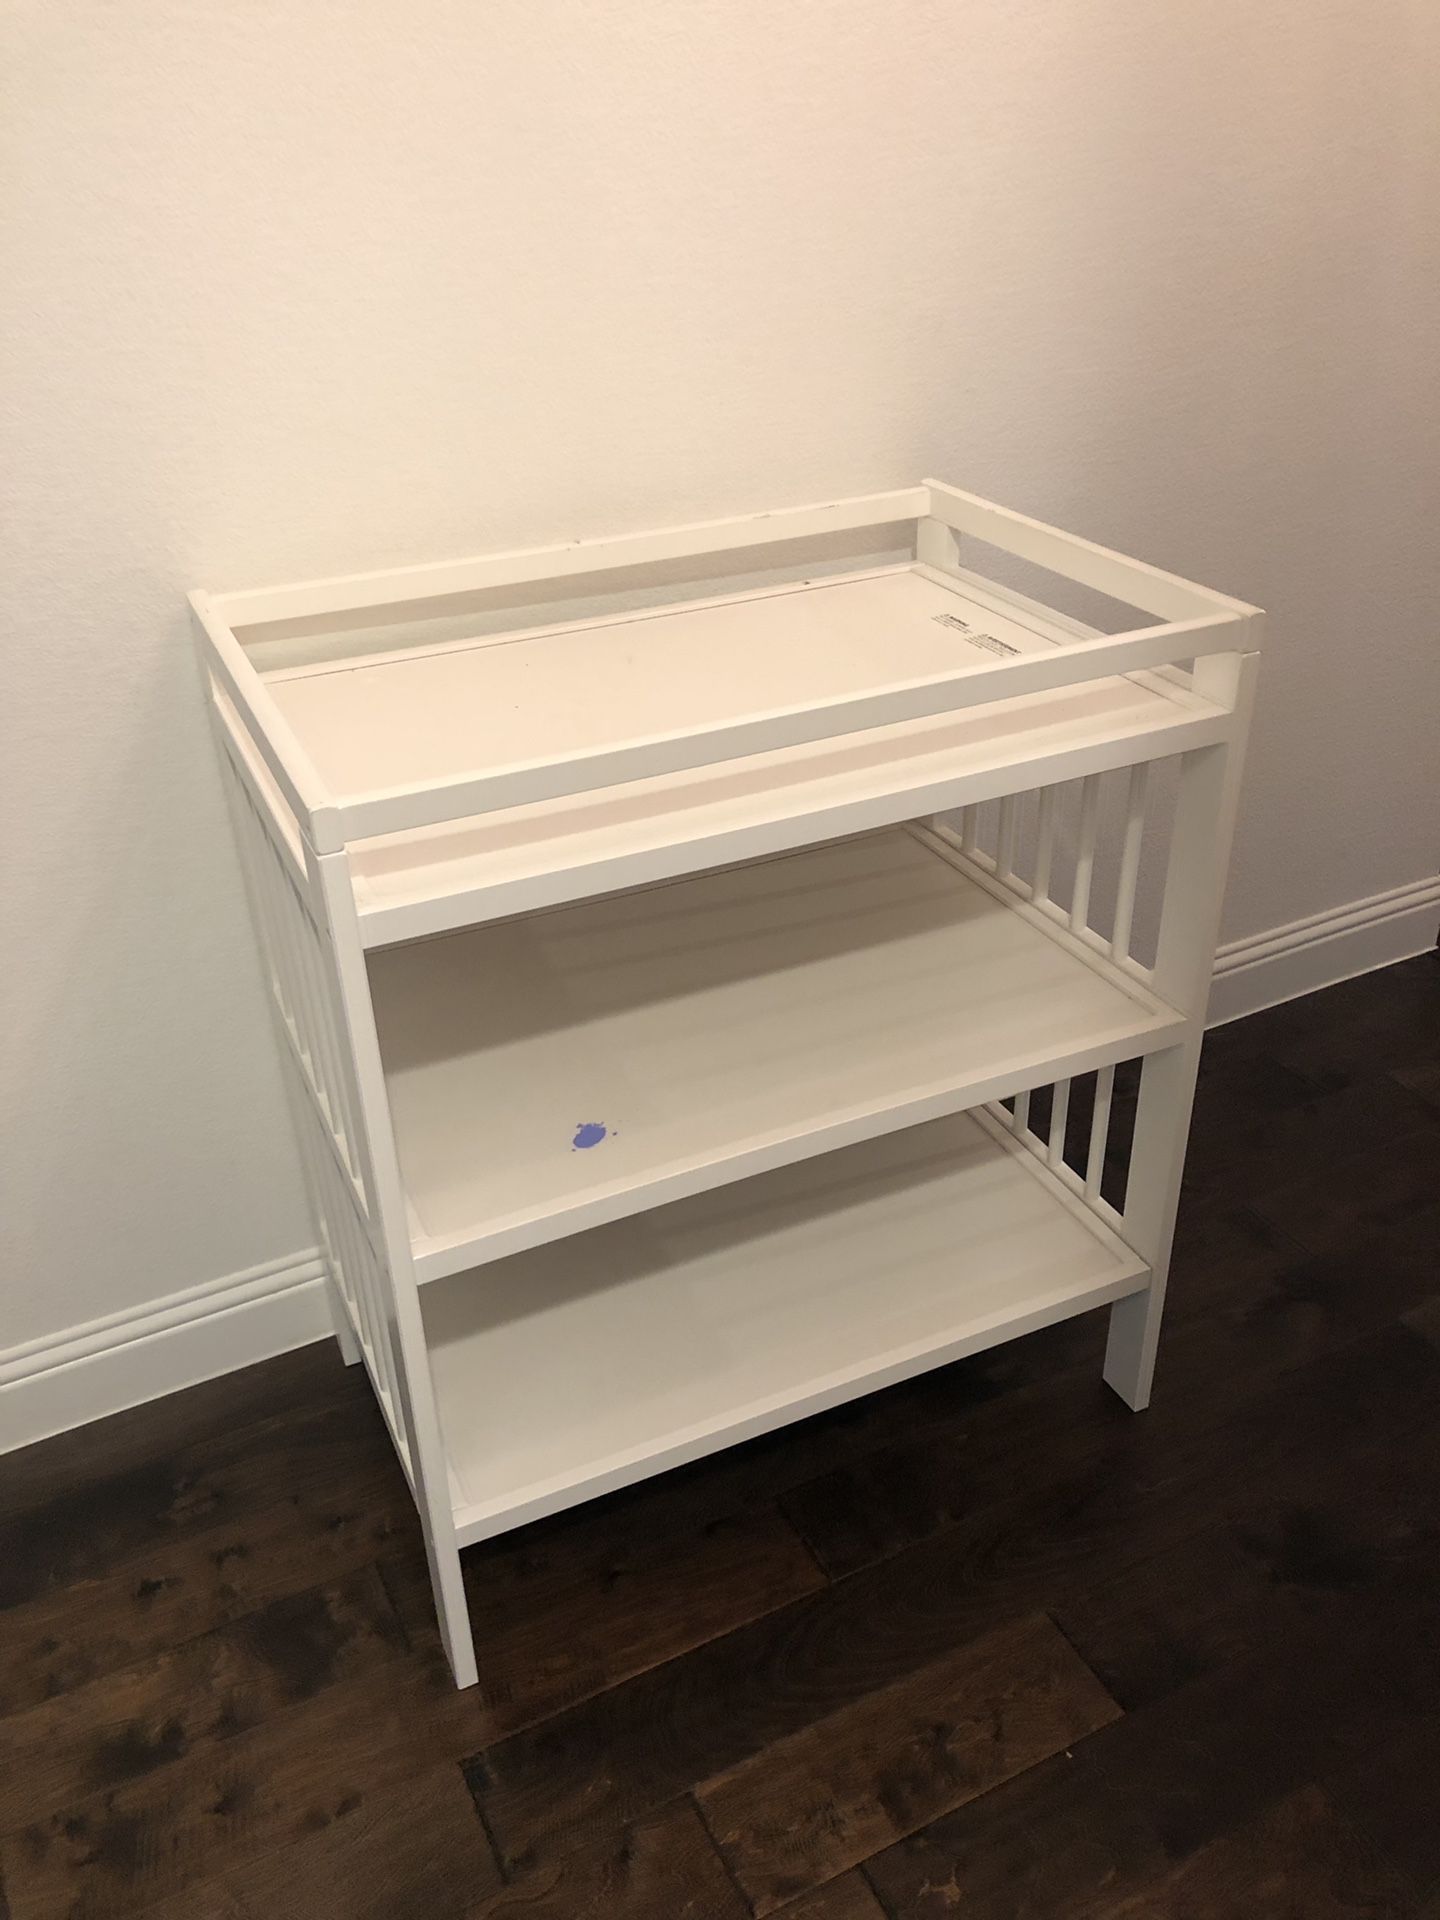 Ikea baby changing table for nursery